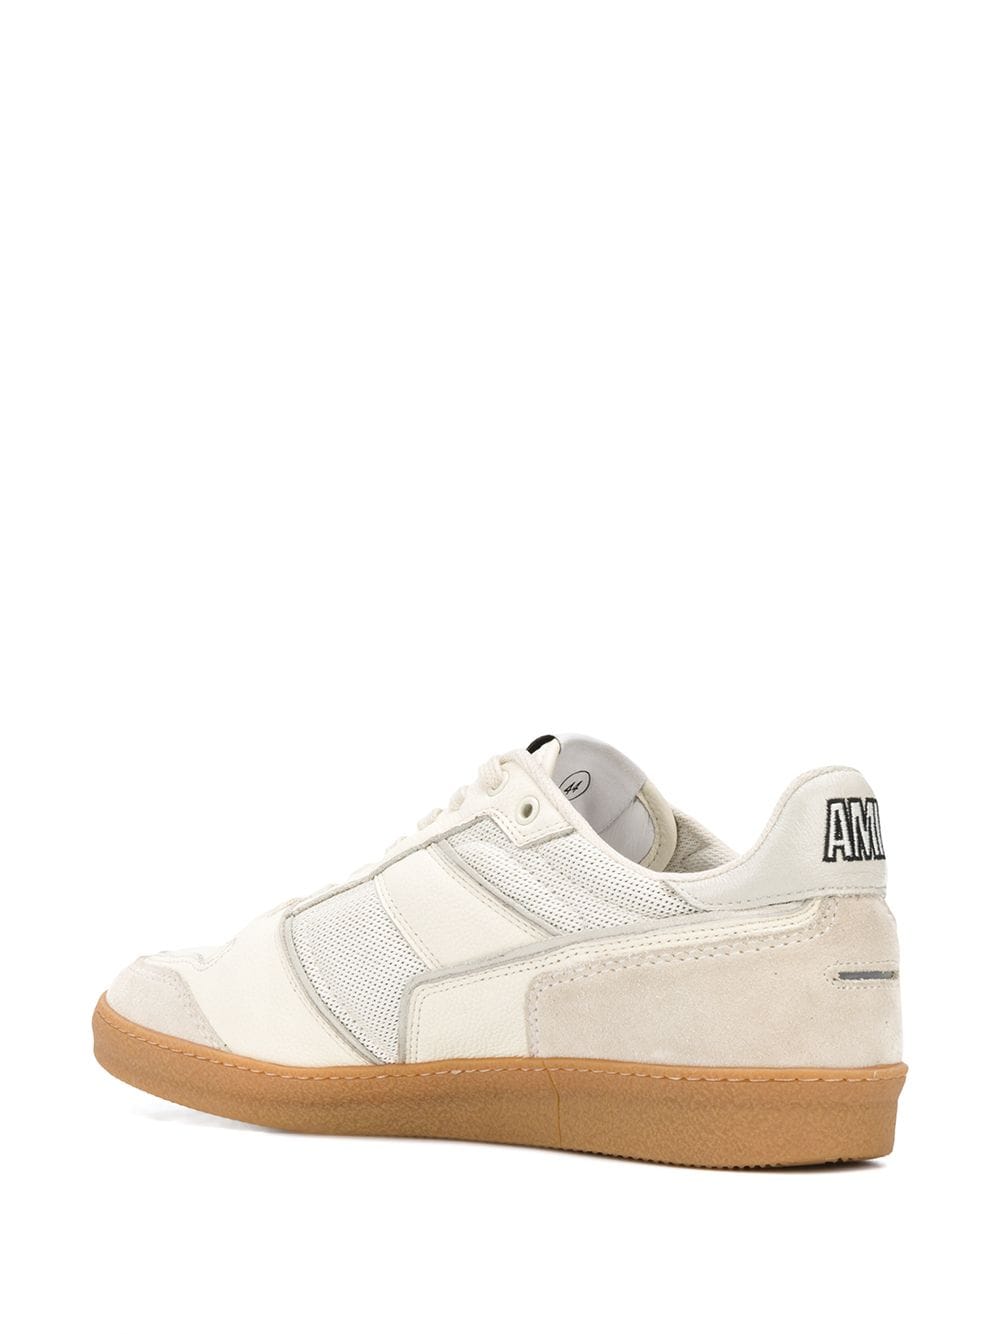 Shop AMI Paris classic low top sneakers with Express Delivery - FARFETCH